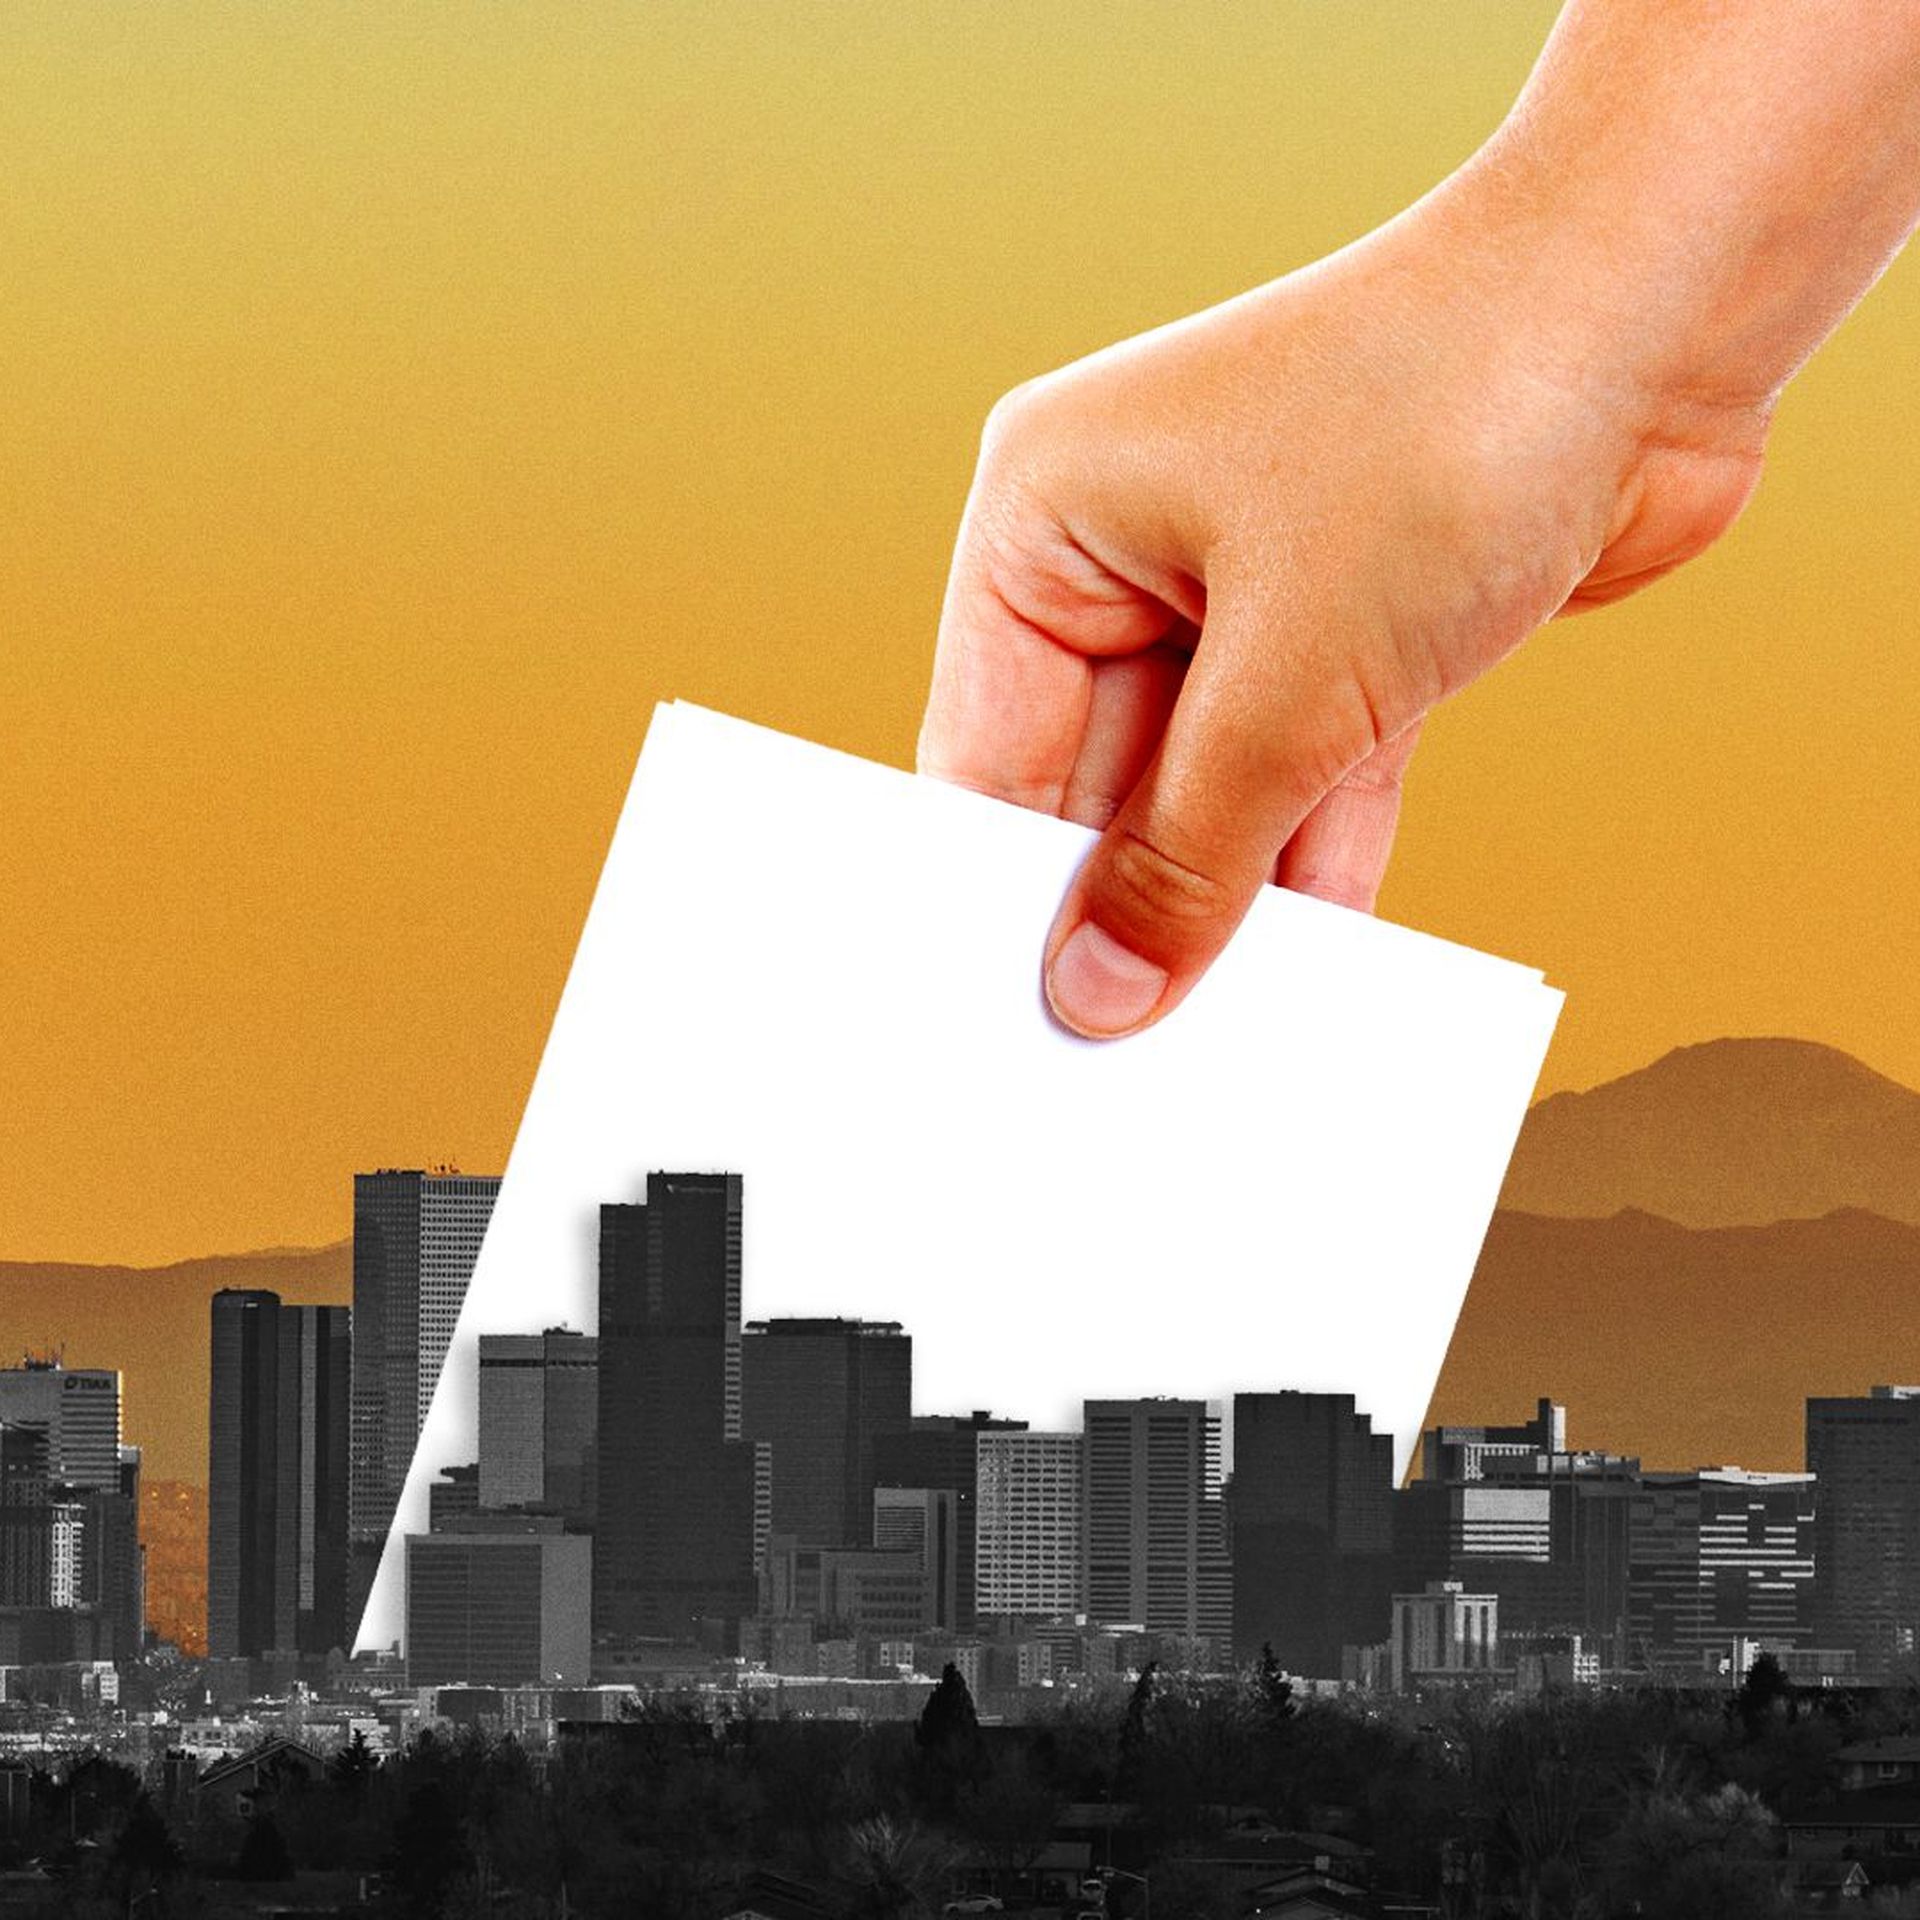 Illustration of a ballot being dropped into the Denver skyline.